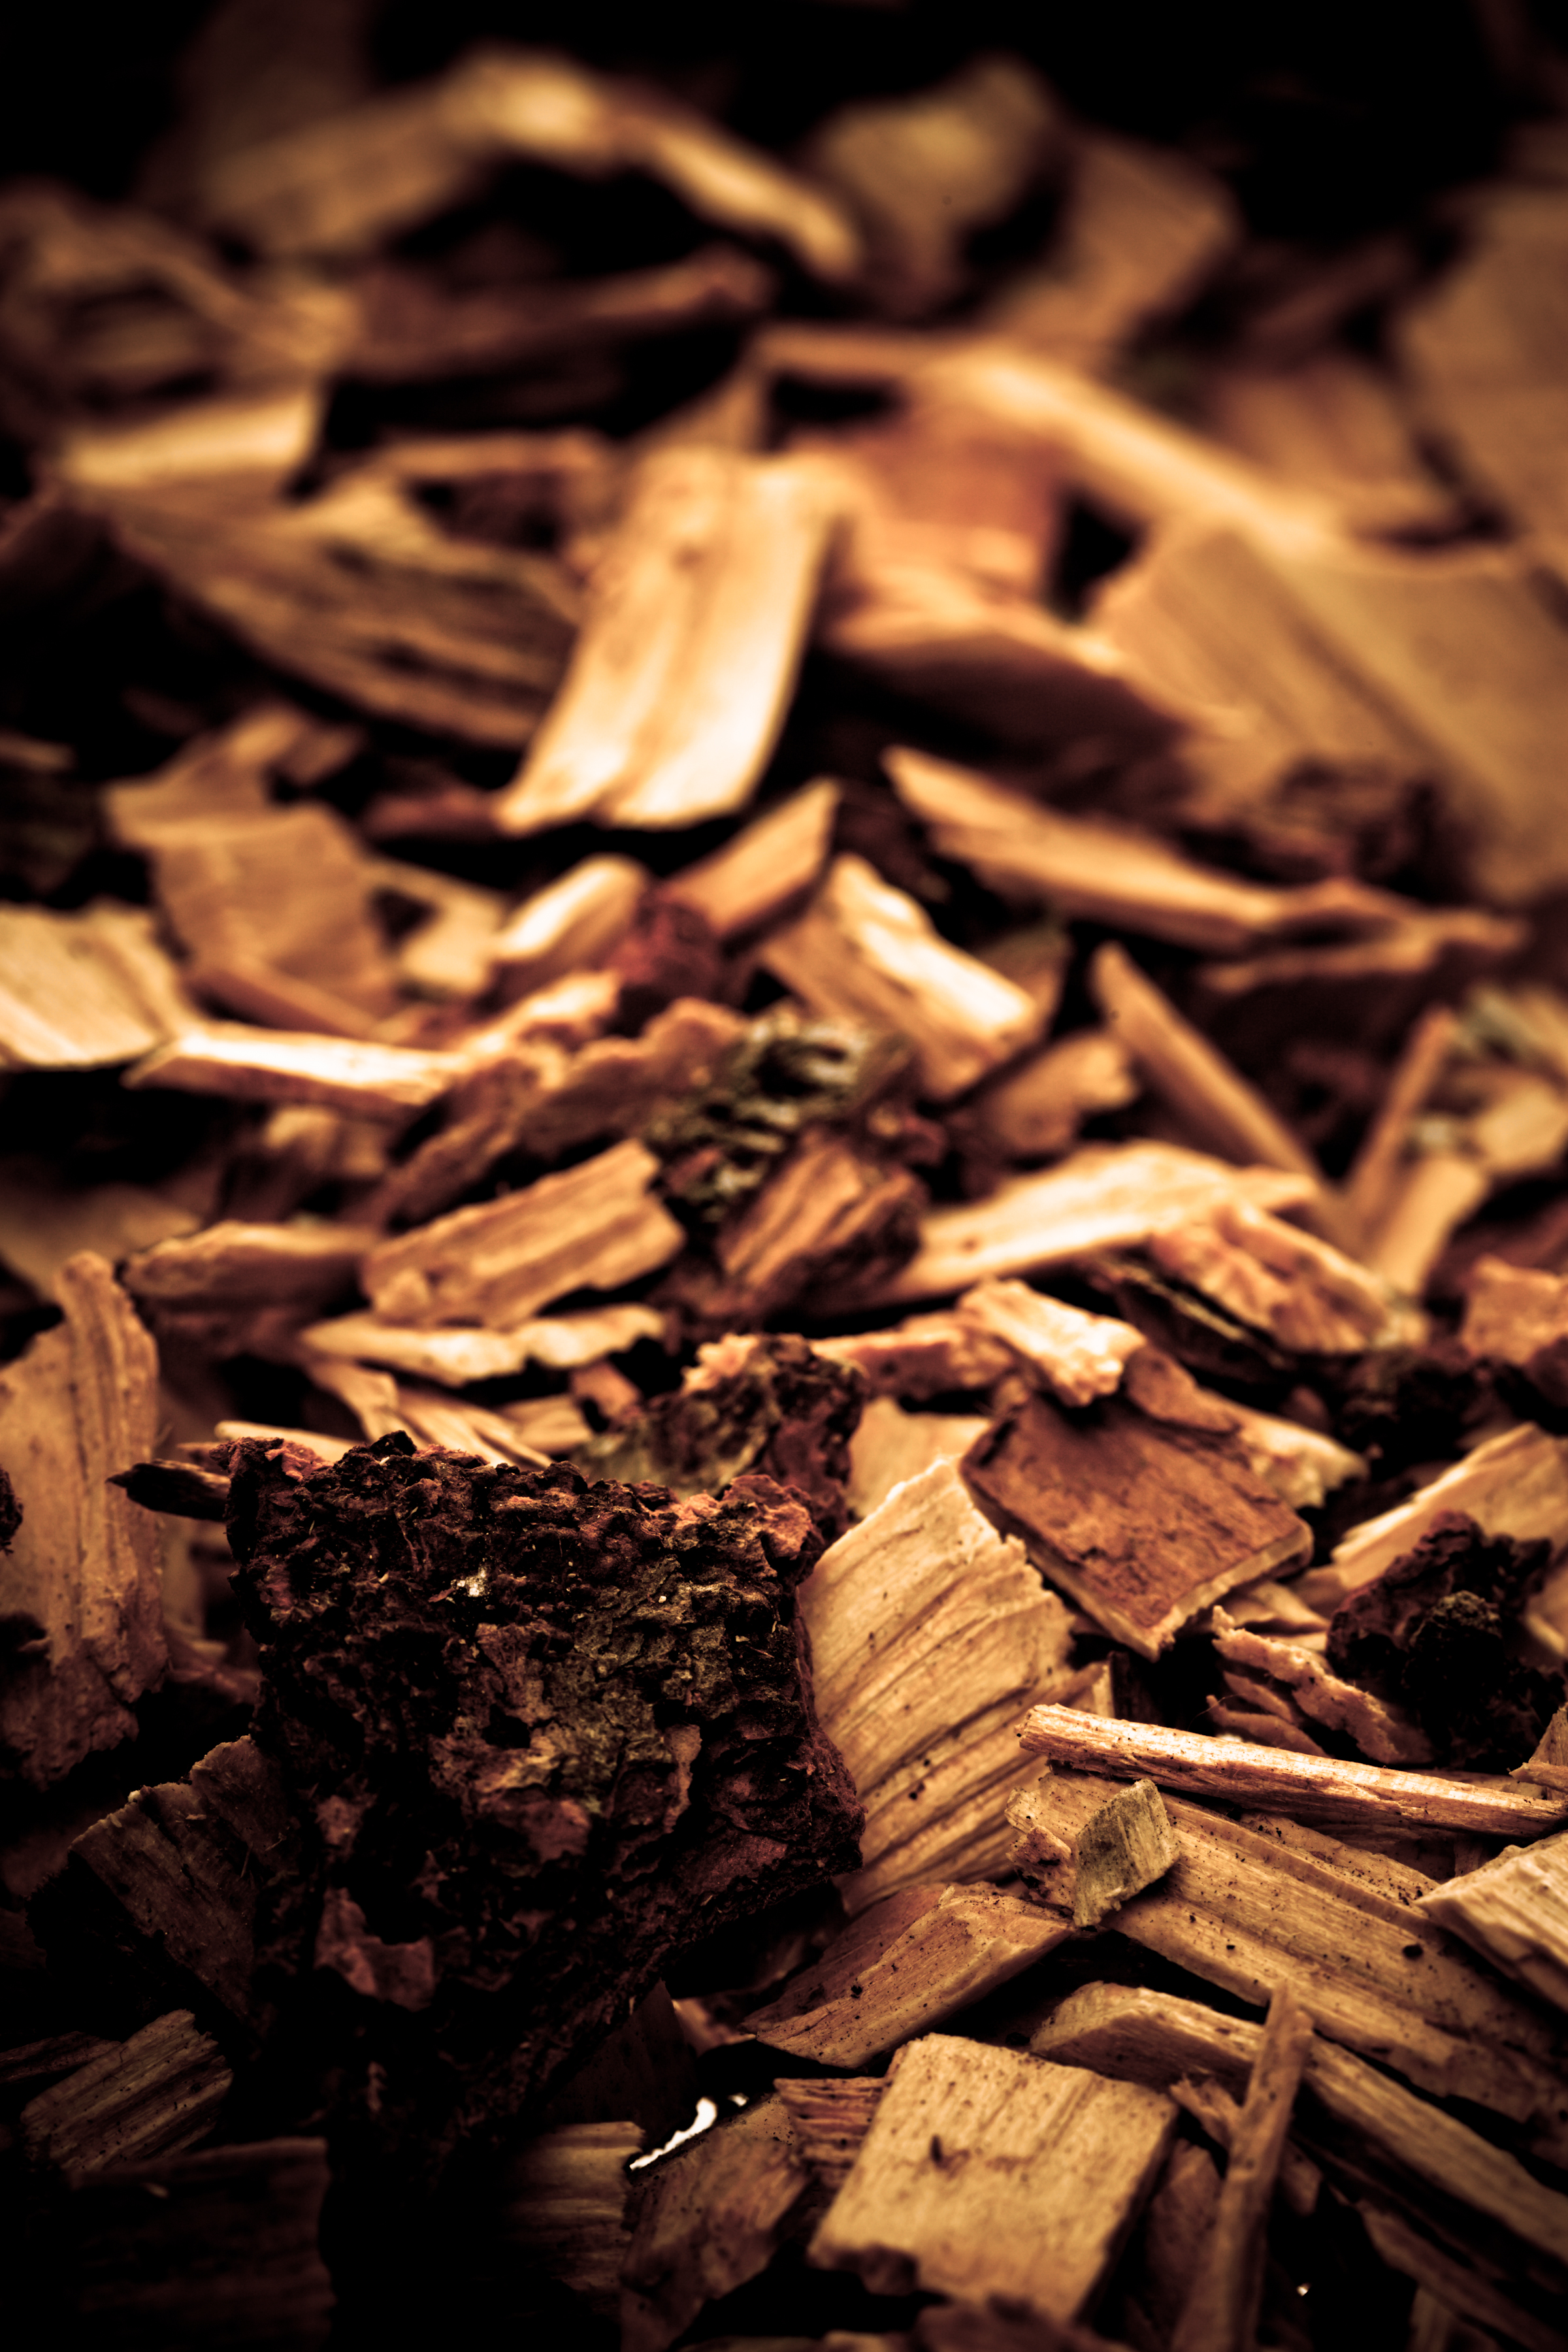 Wooden Chip Texture, Abstract, Brown, Chips, Freetexturefrida, HQ Photo